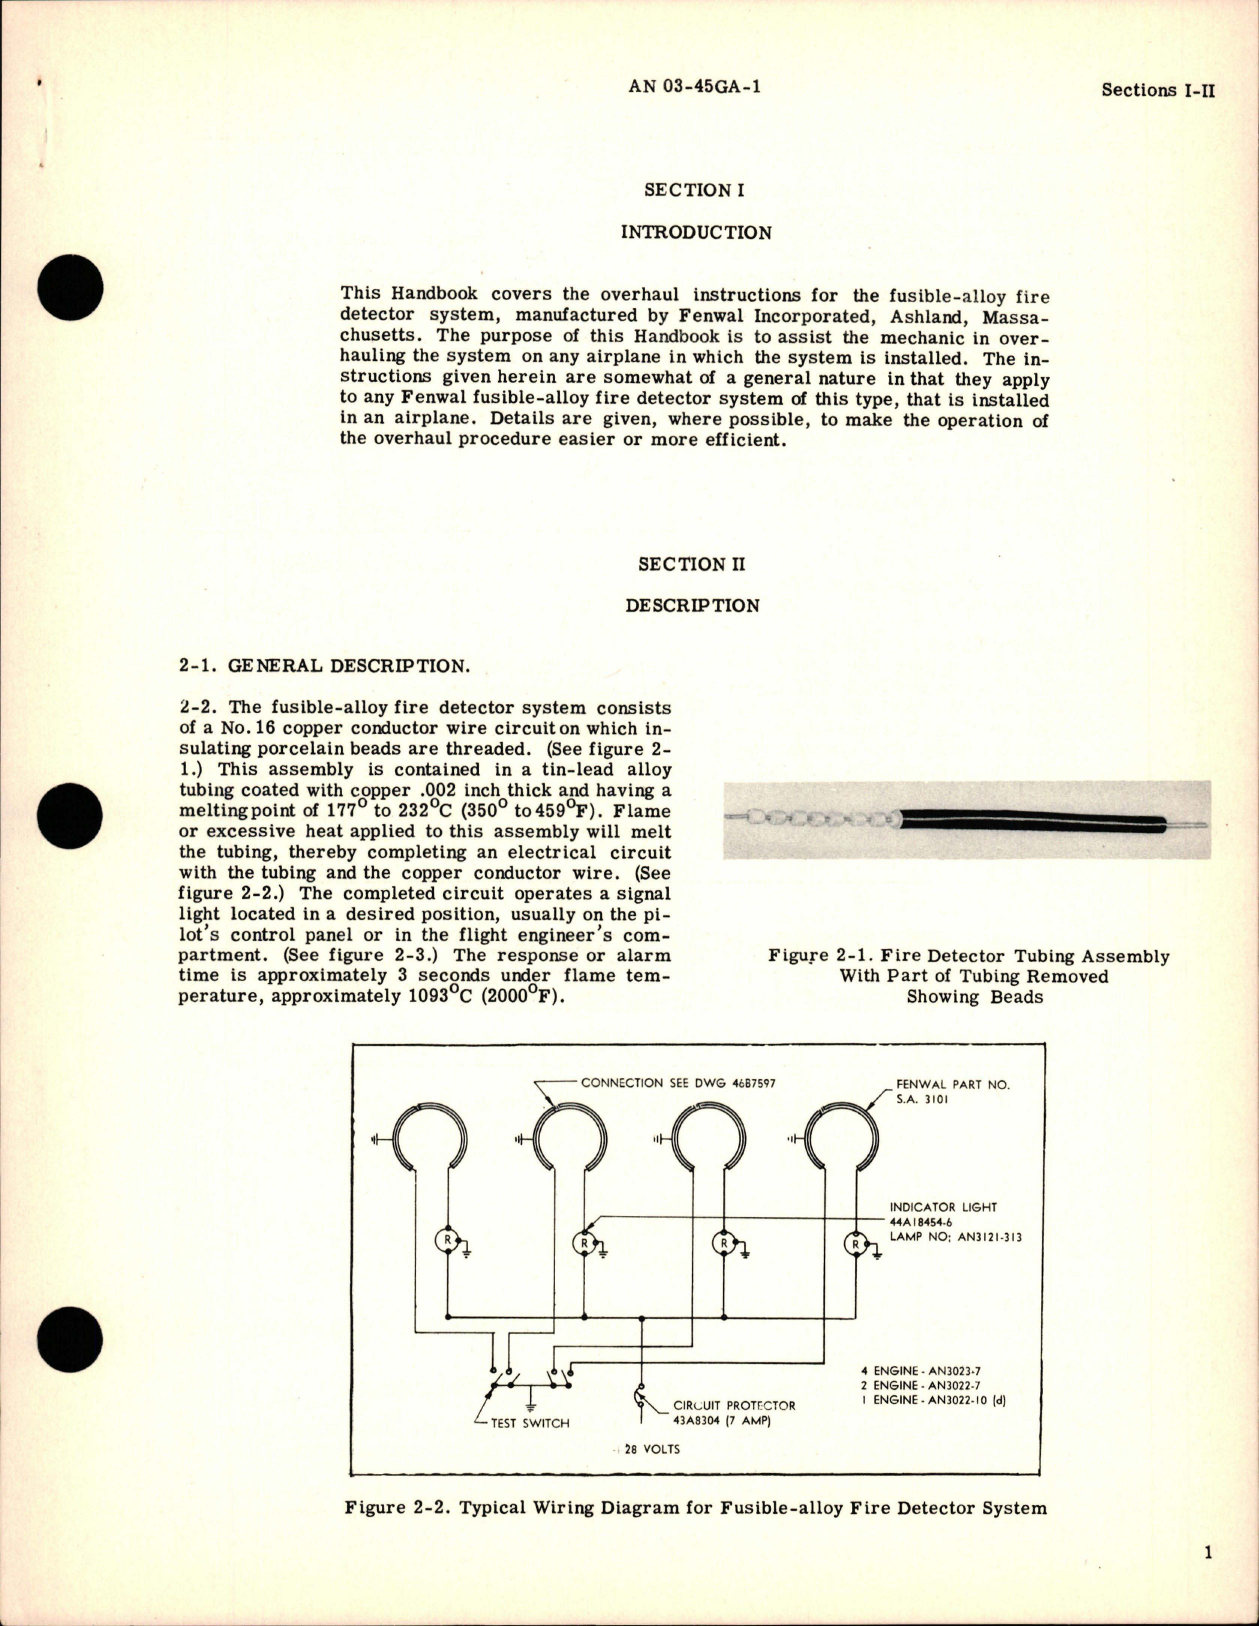 Sample page 5 from AirCorps Library document: Overhaul Instructions for Fusible-Alloy Fire Detector System